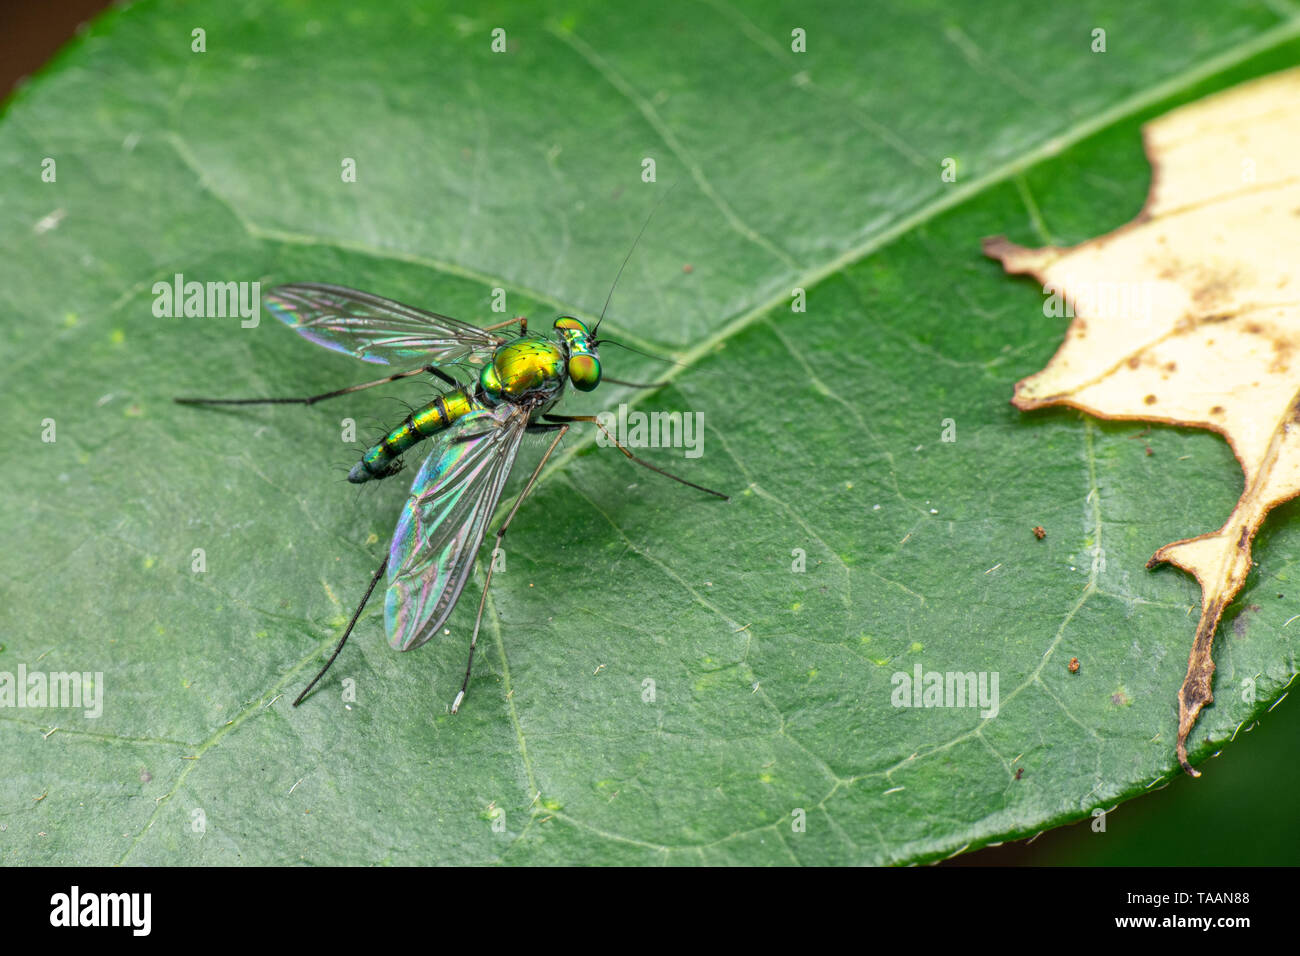 A bright green long-legged fly from the family Dolichopodidae Stock Photo